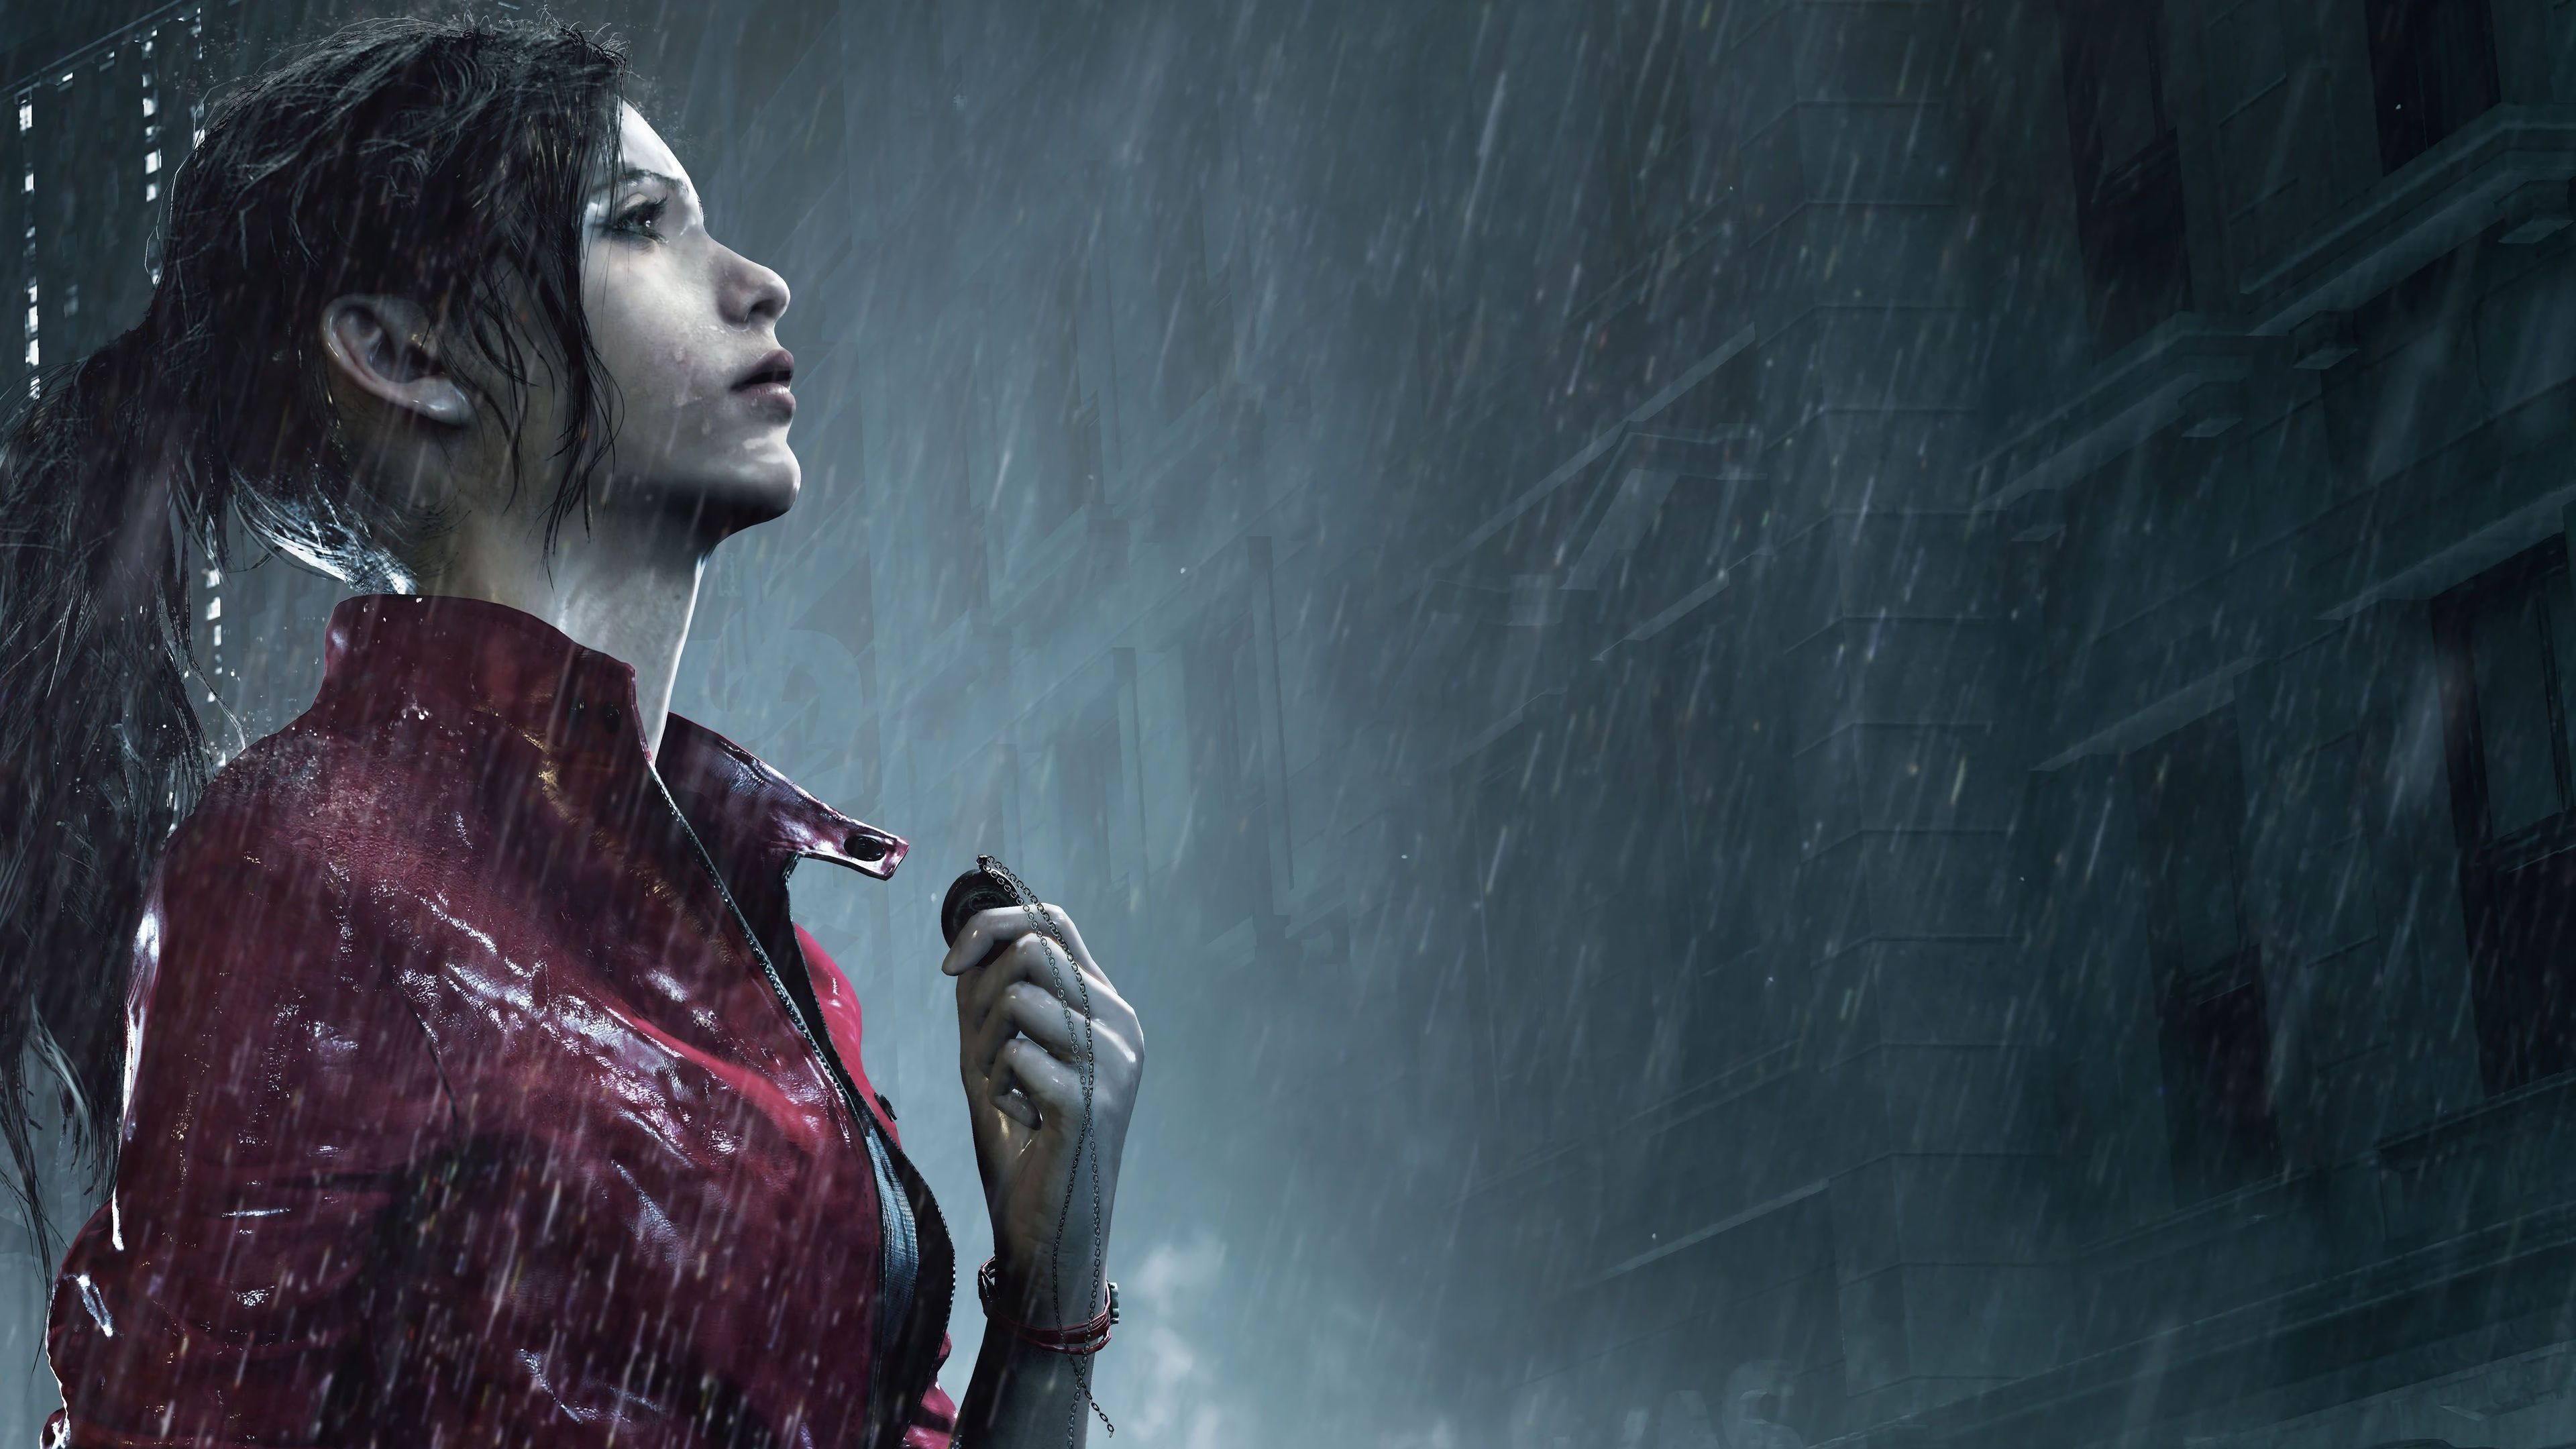 resident evil 2 claire redfieldWallpapers